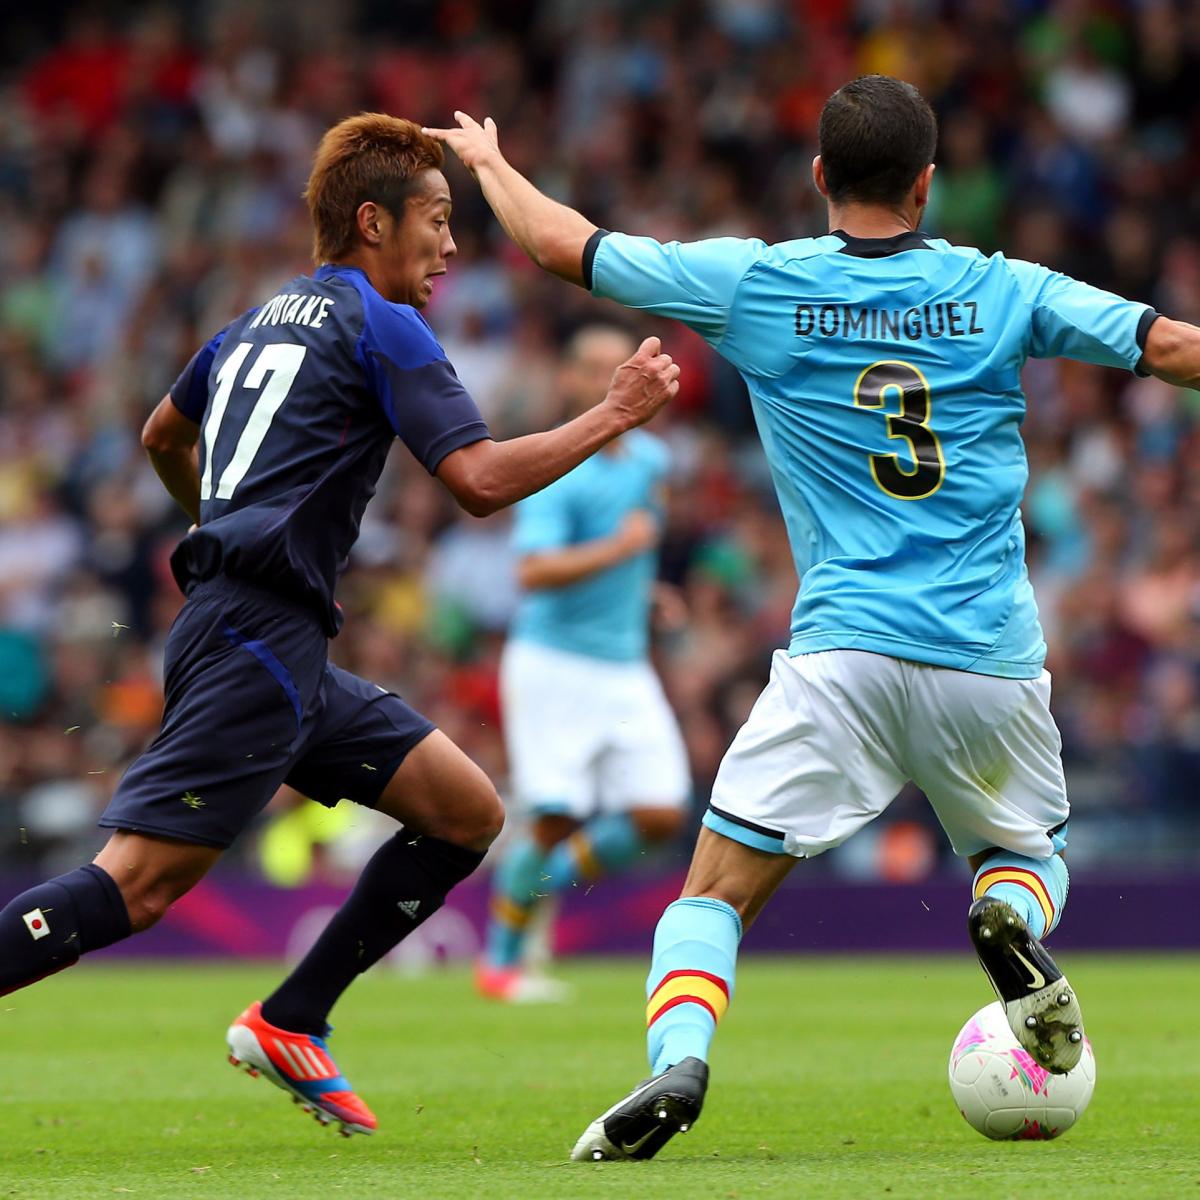 Olympic Soccer Scores 2012: Highlighting Winners and Losers from Early Action | Bleacher Report ...